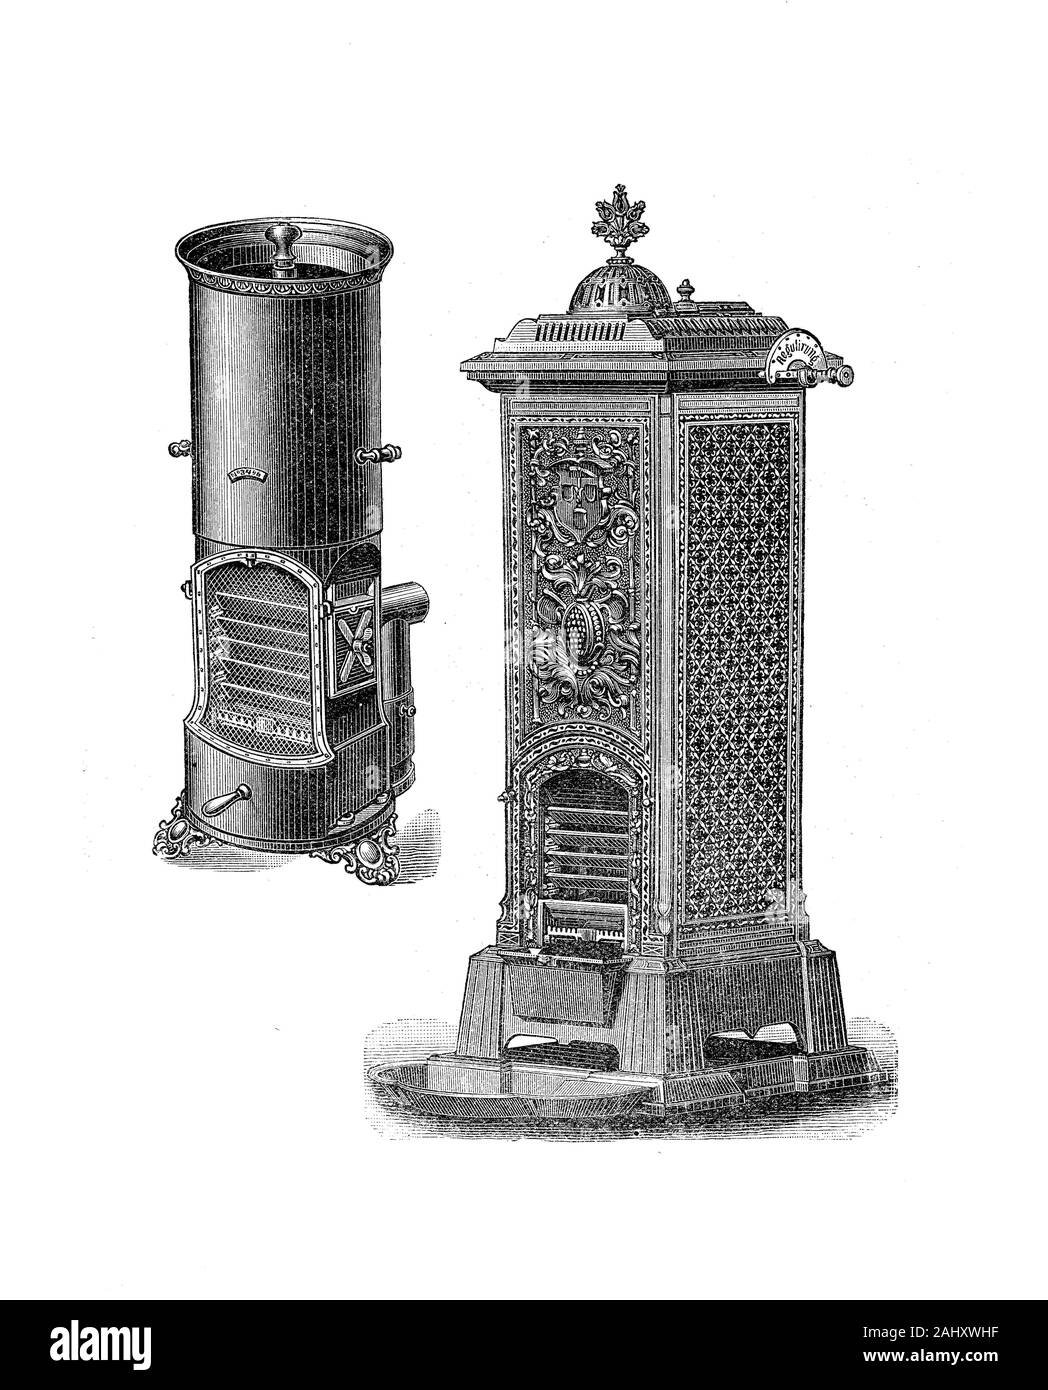 House appliance: heating cast-iron stove models 19th century Stock Photo